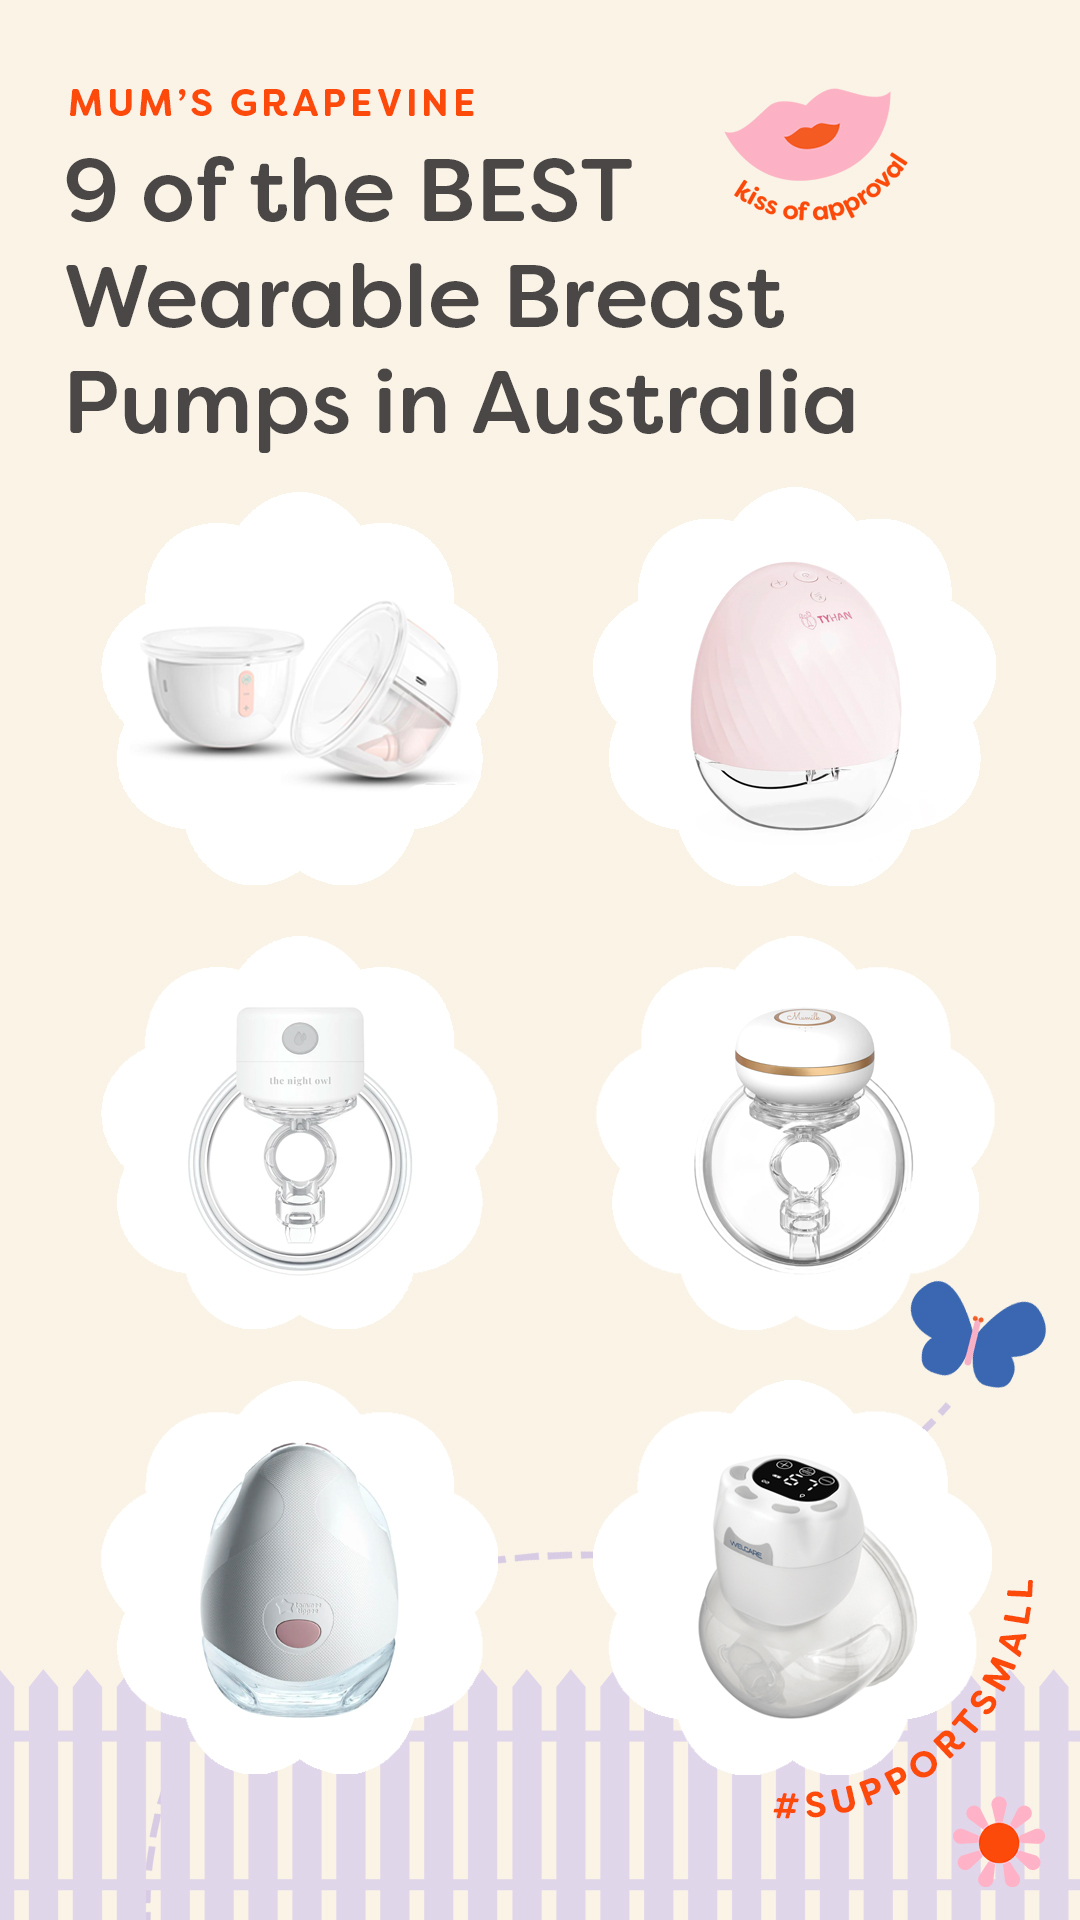 9 Popular wearable breastpumps siting side by side in a comparison